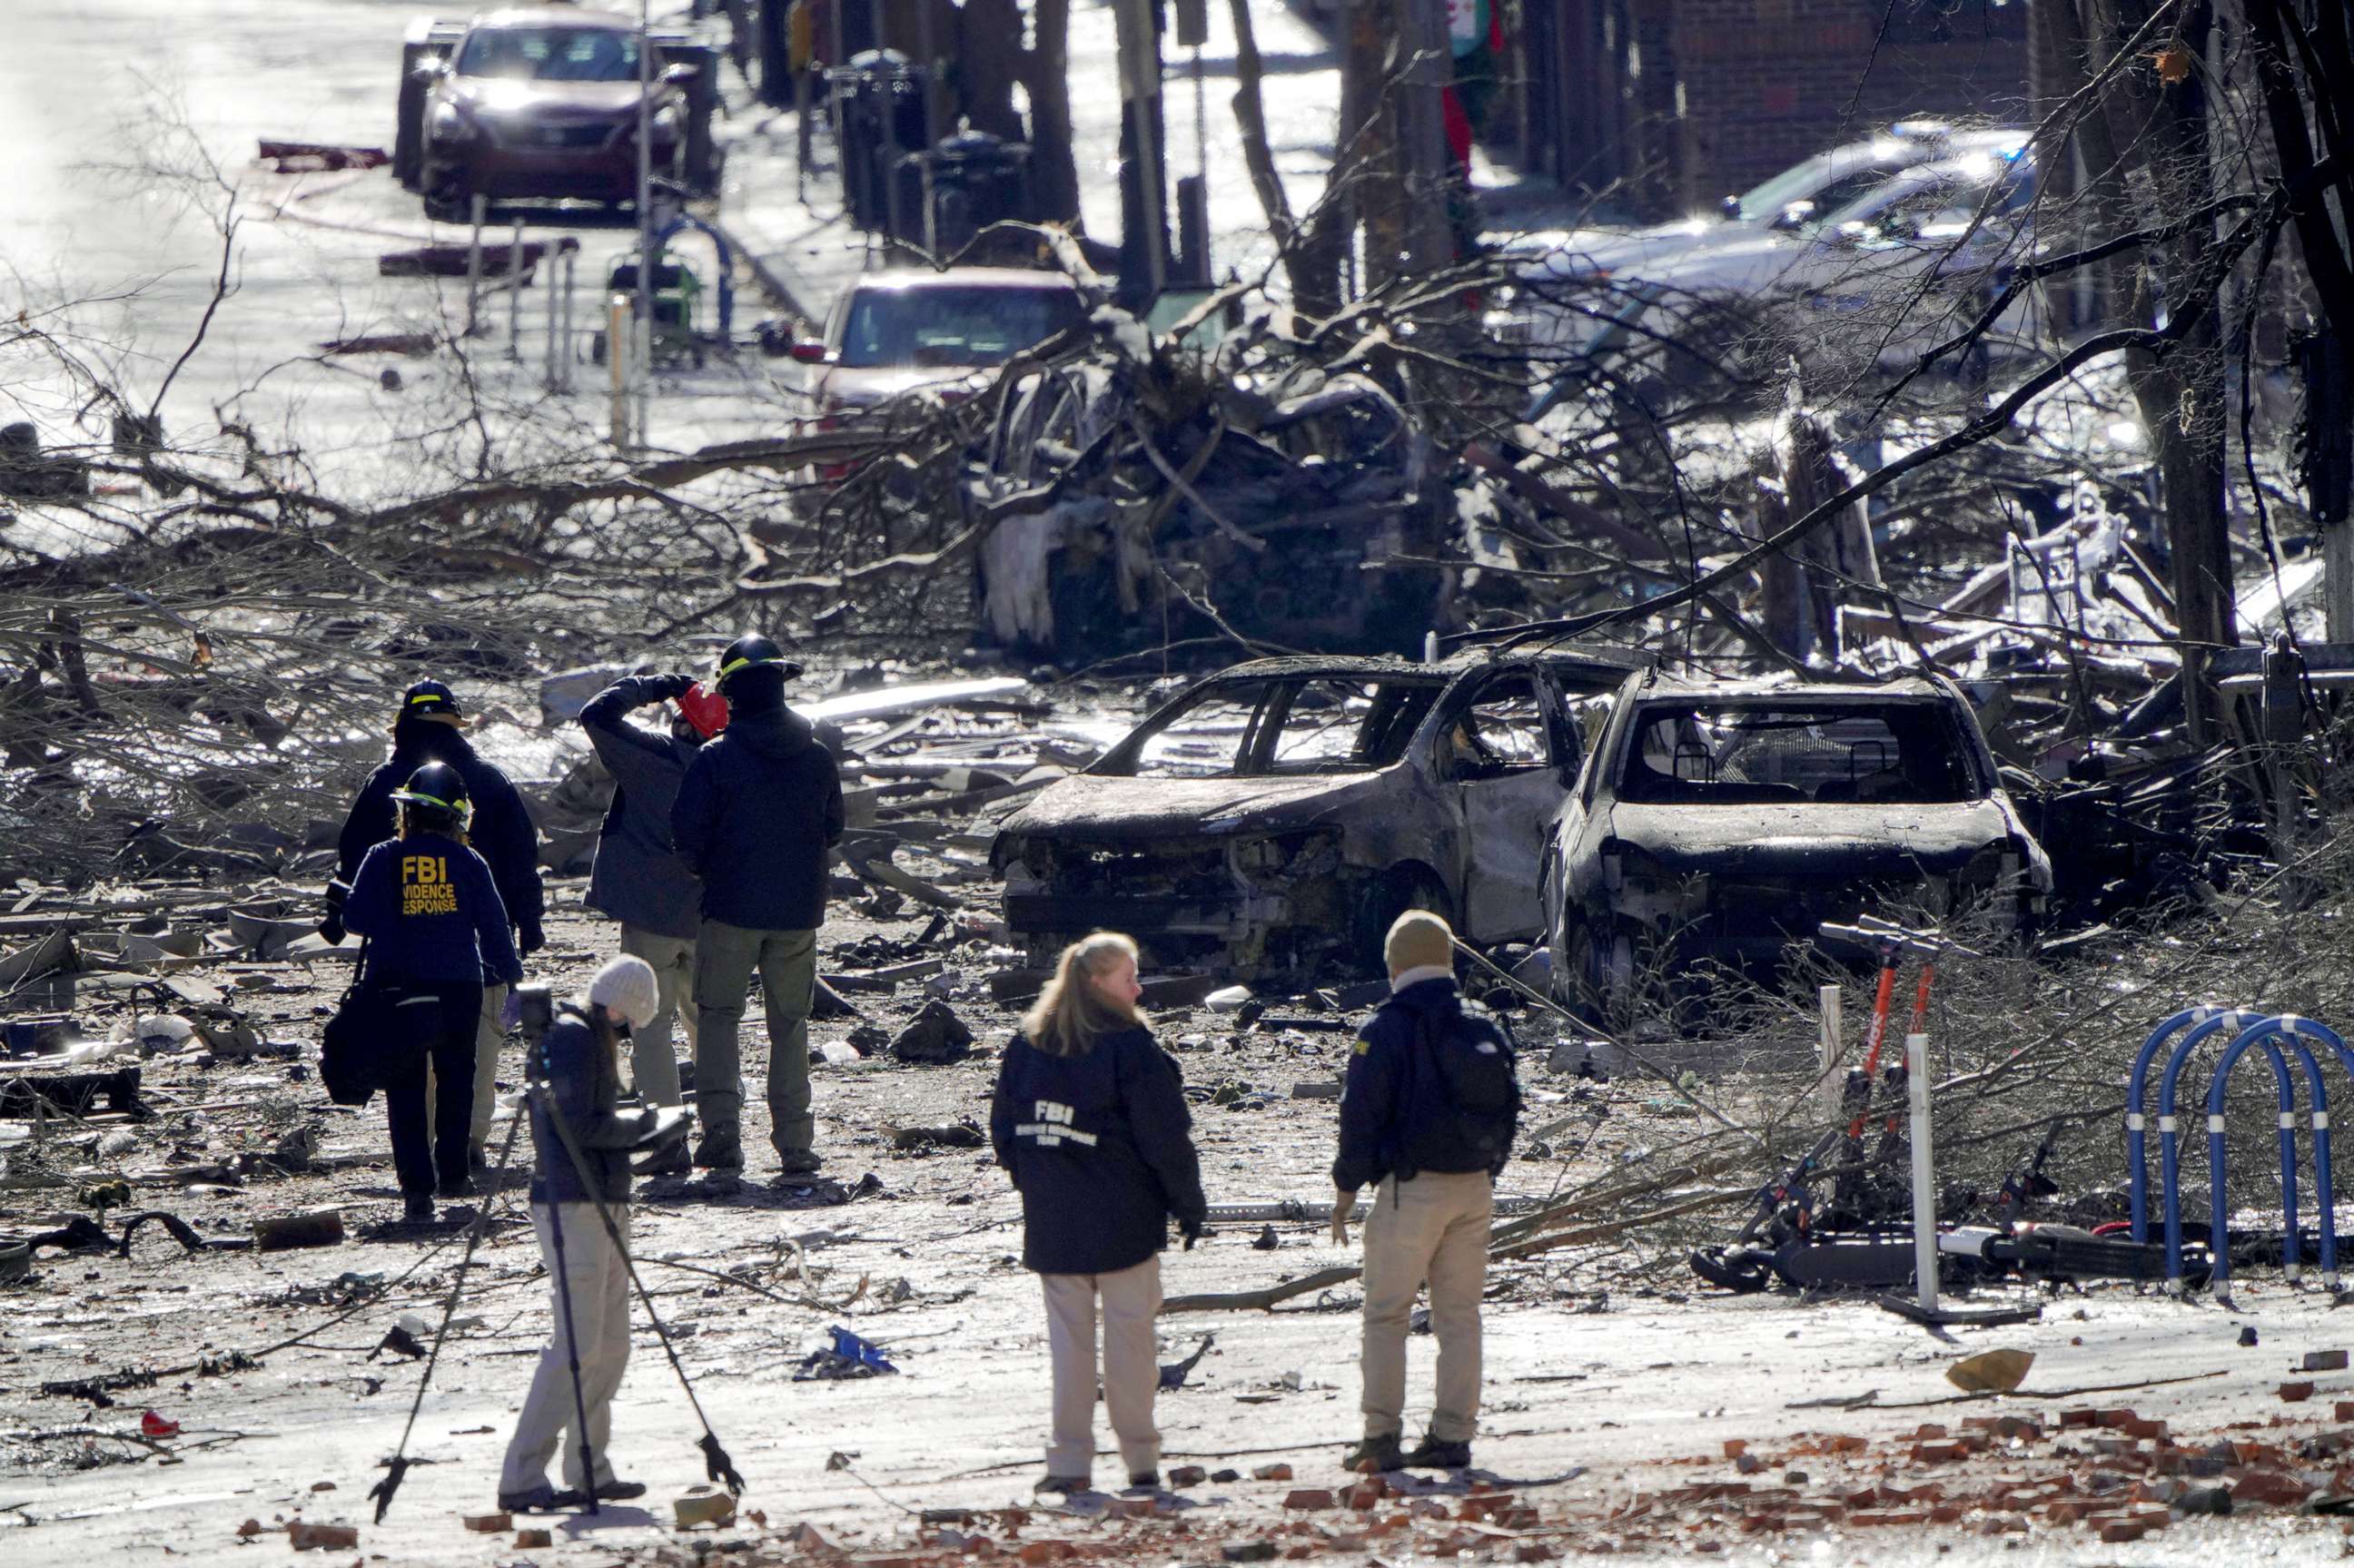 PHOTO: Investigators work near the site of an explosion on 2nd Avenue that occurred the day before in Nashville, Tenn., Dec. 26, 2020.